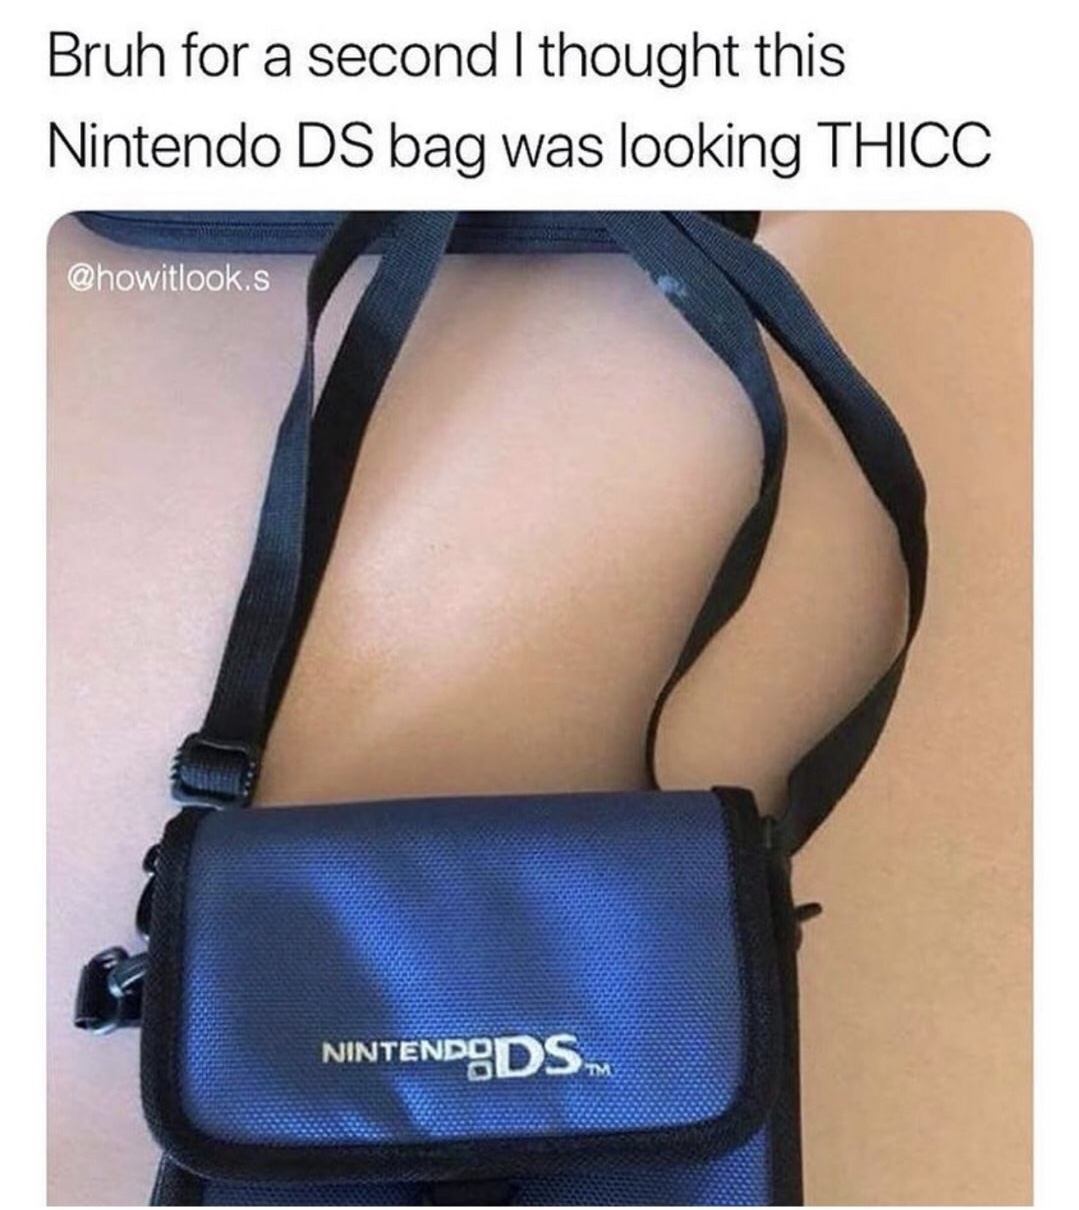 dank memes - thicc nintendo bag - Bruh for a second I thought this Nintendo Ds bag was looking Thicc .s Nintendo Ds.